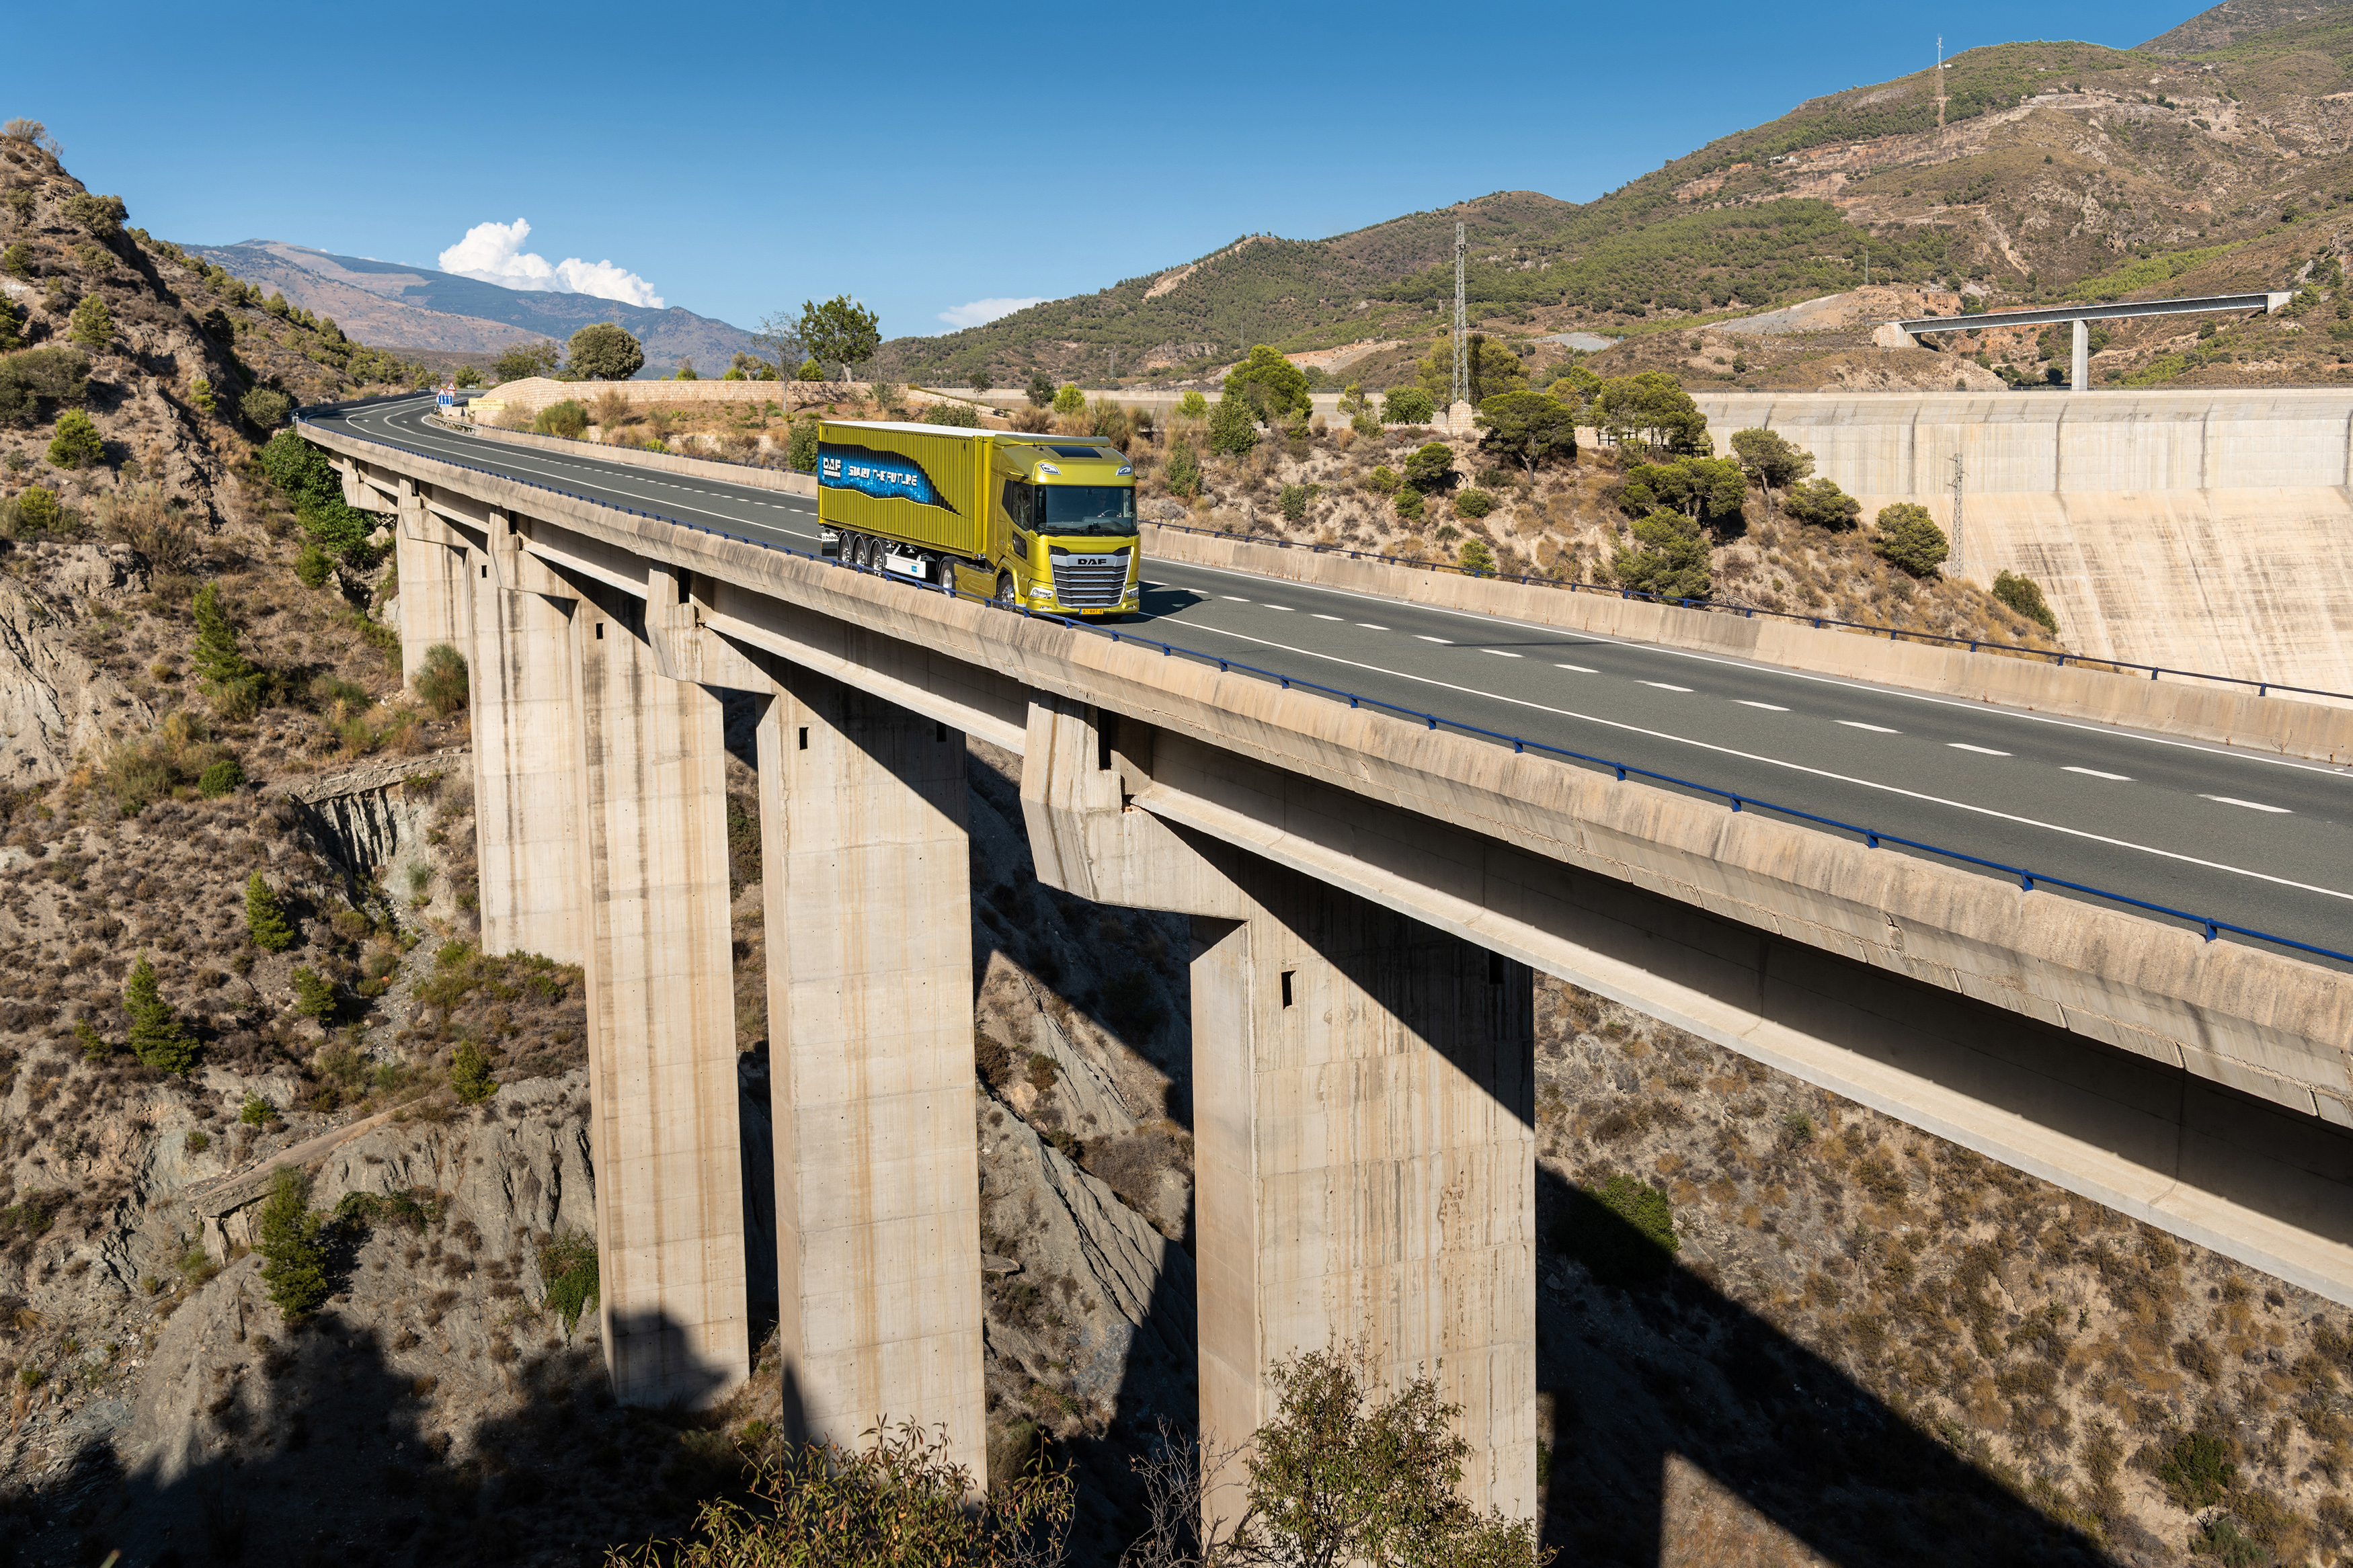 03-New-Generation-DAF-Malaga-in-Andalusian-landscape